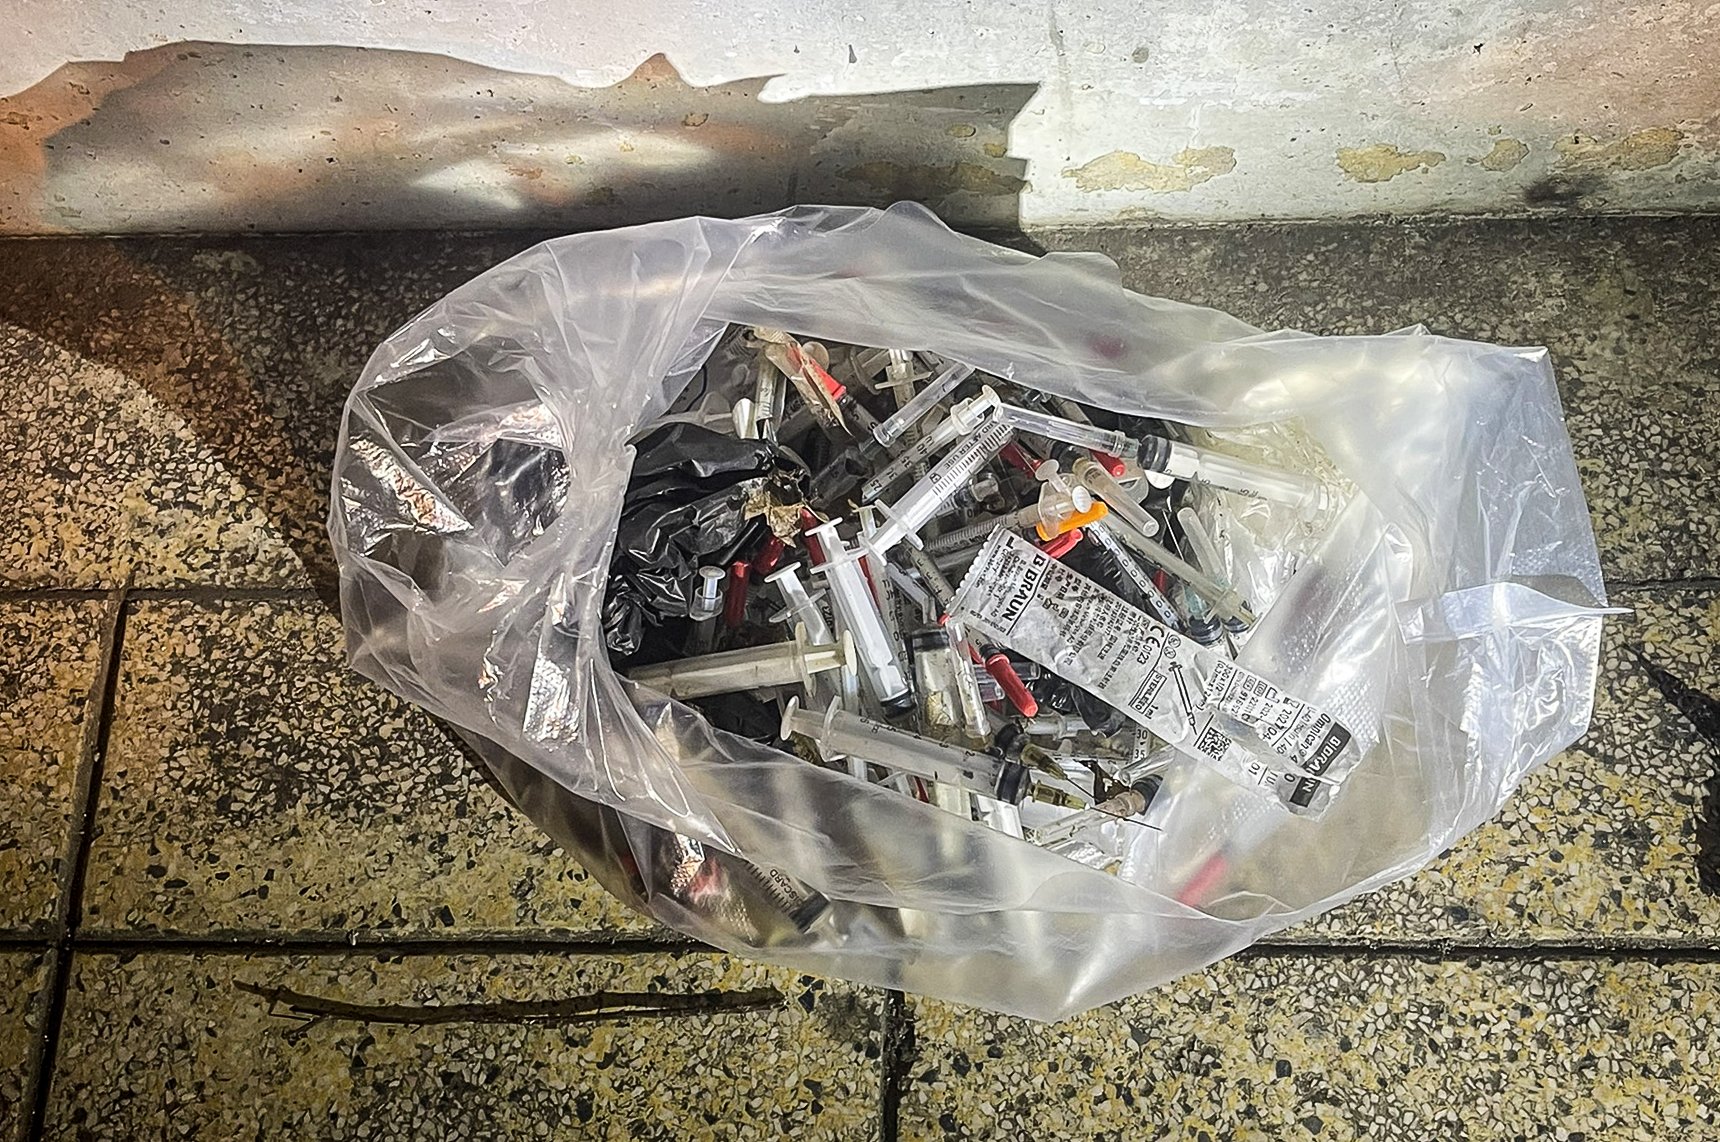 This supplied photo shows a plastic bag of used syringes collected by staff of the People's Committee of Ward 13 in Binh Thanh District, Ho Chi Minh City.